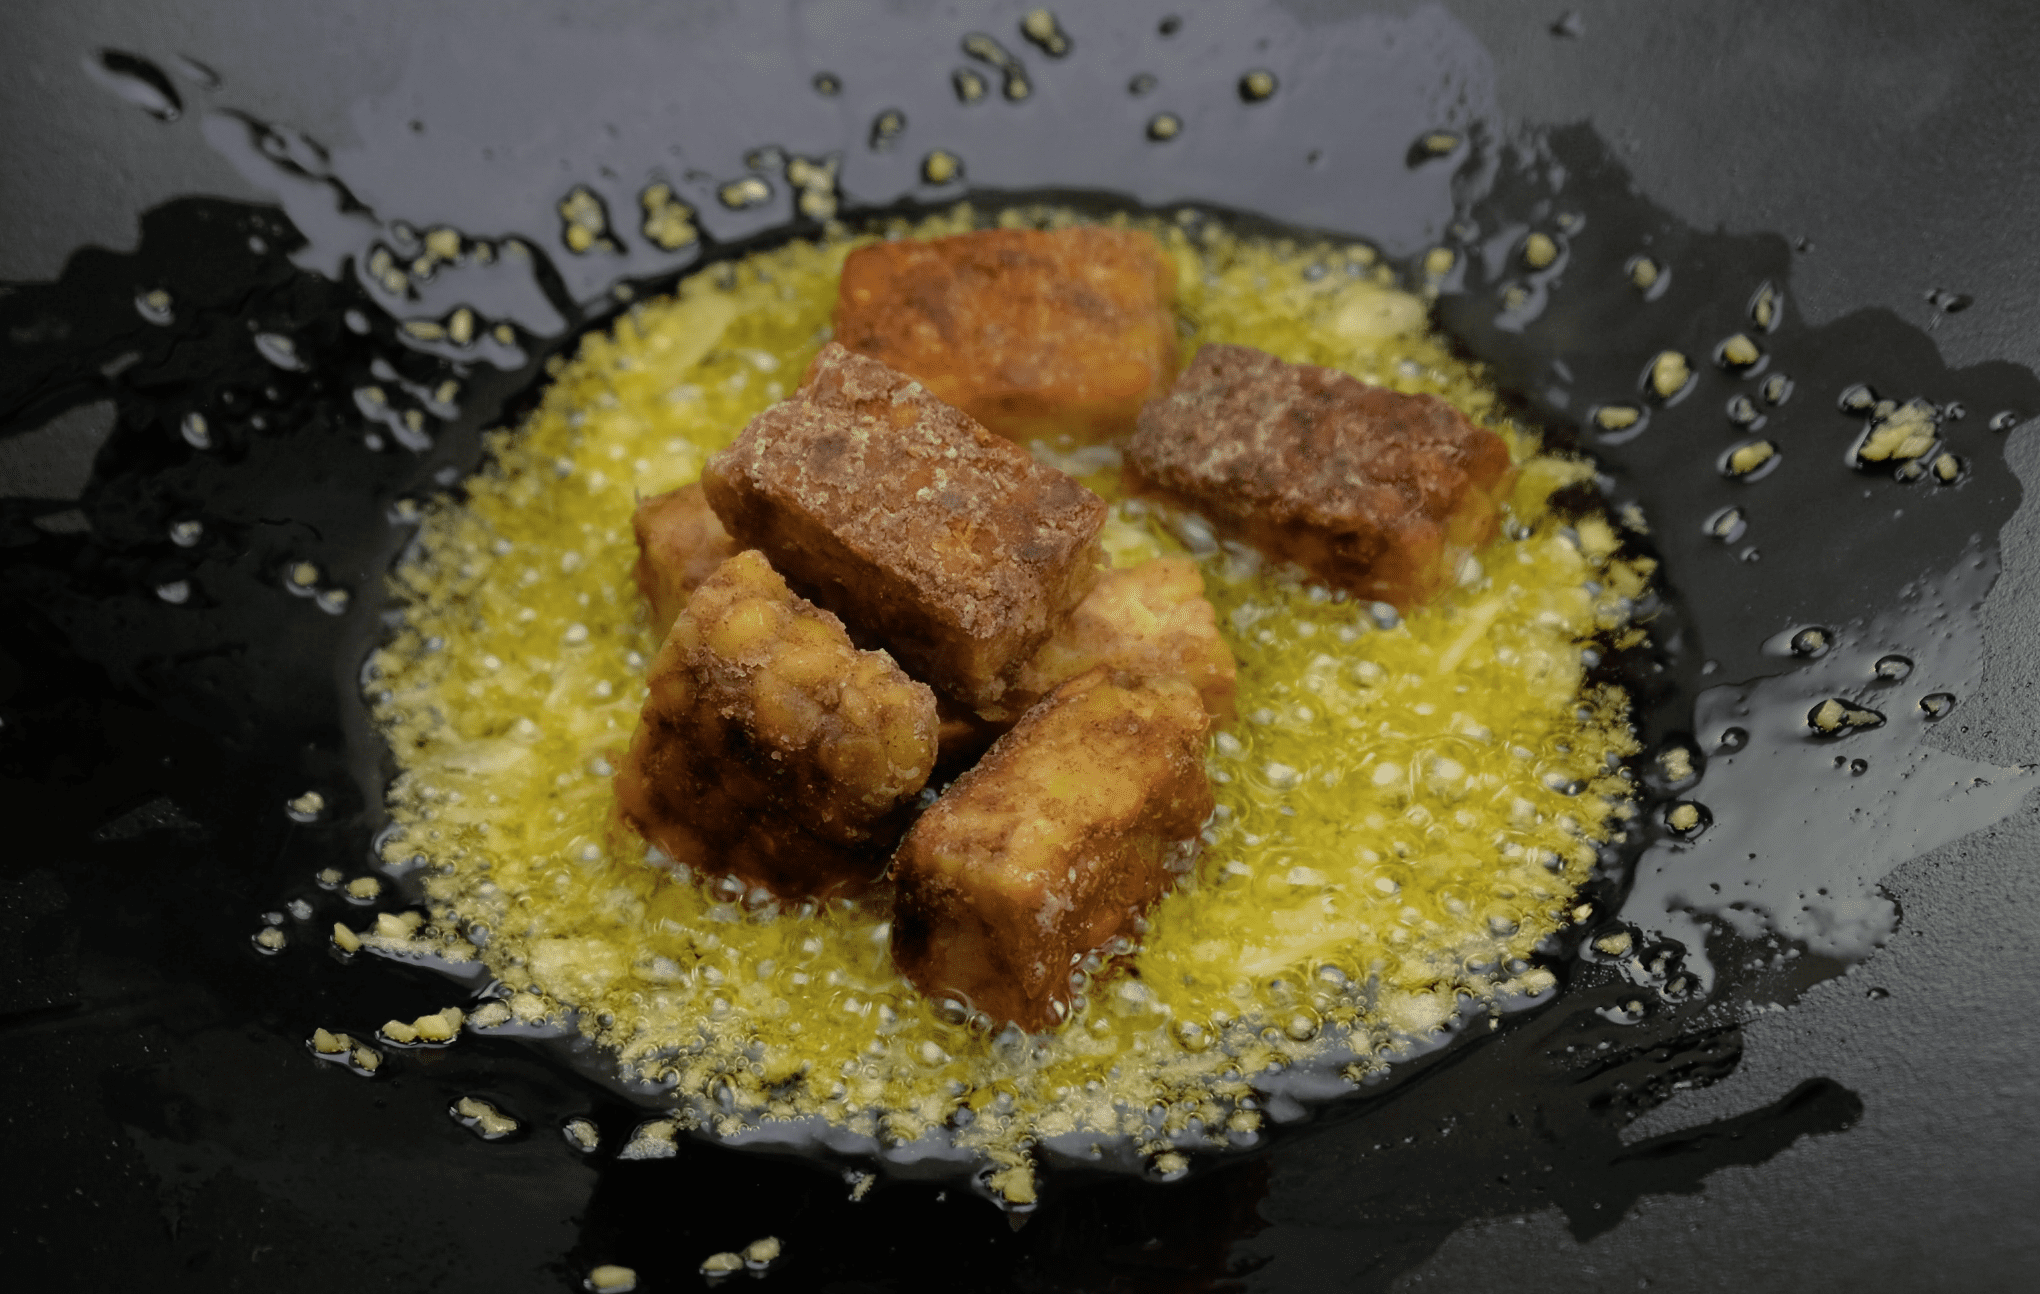 SAUTING, TEMPEH WITH GINGER AND GARLIC